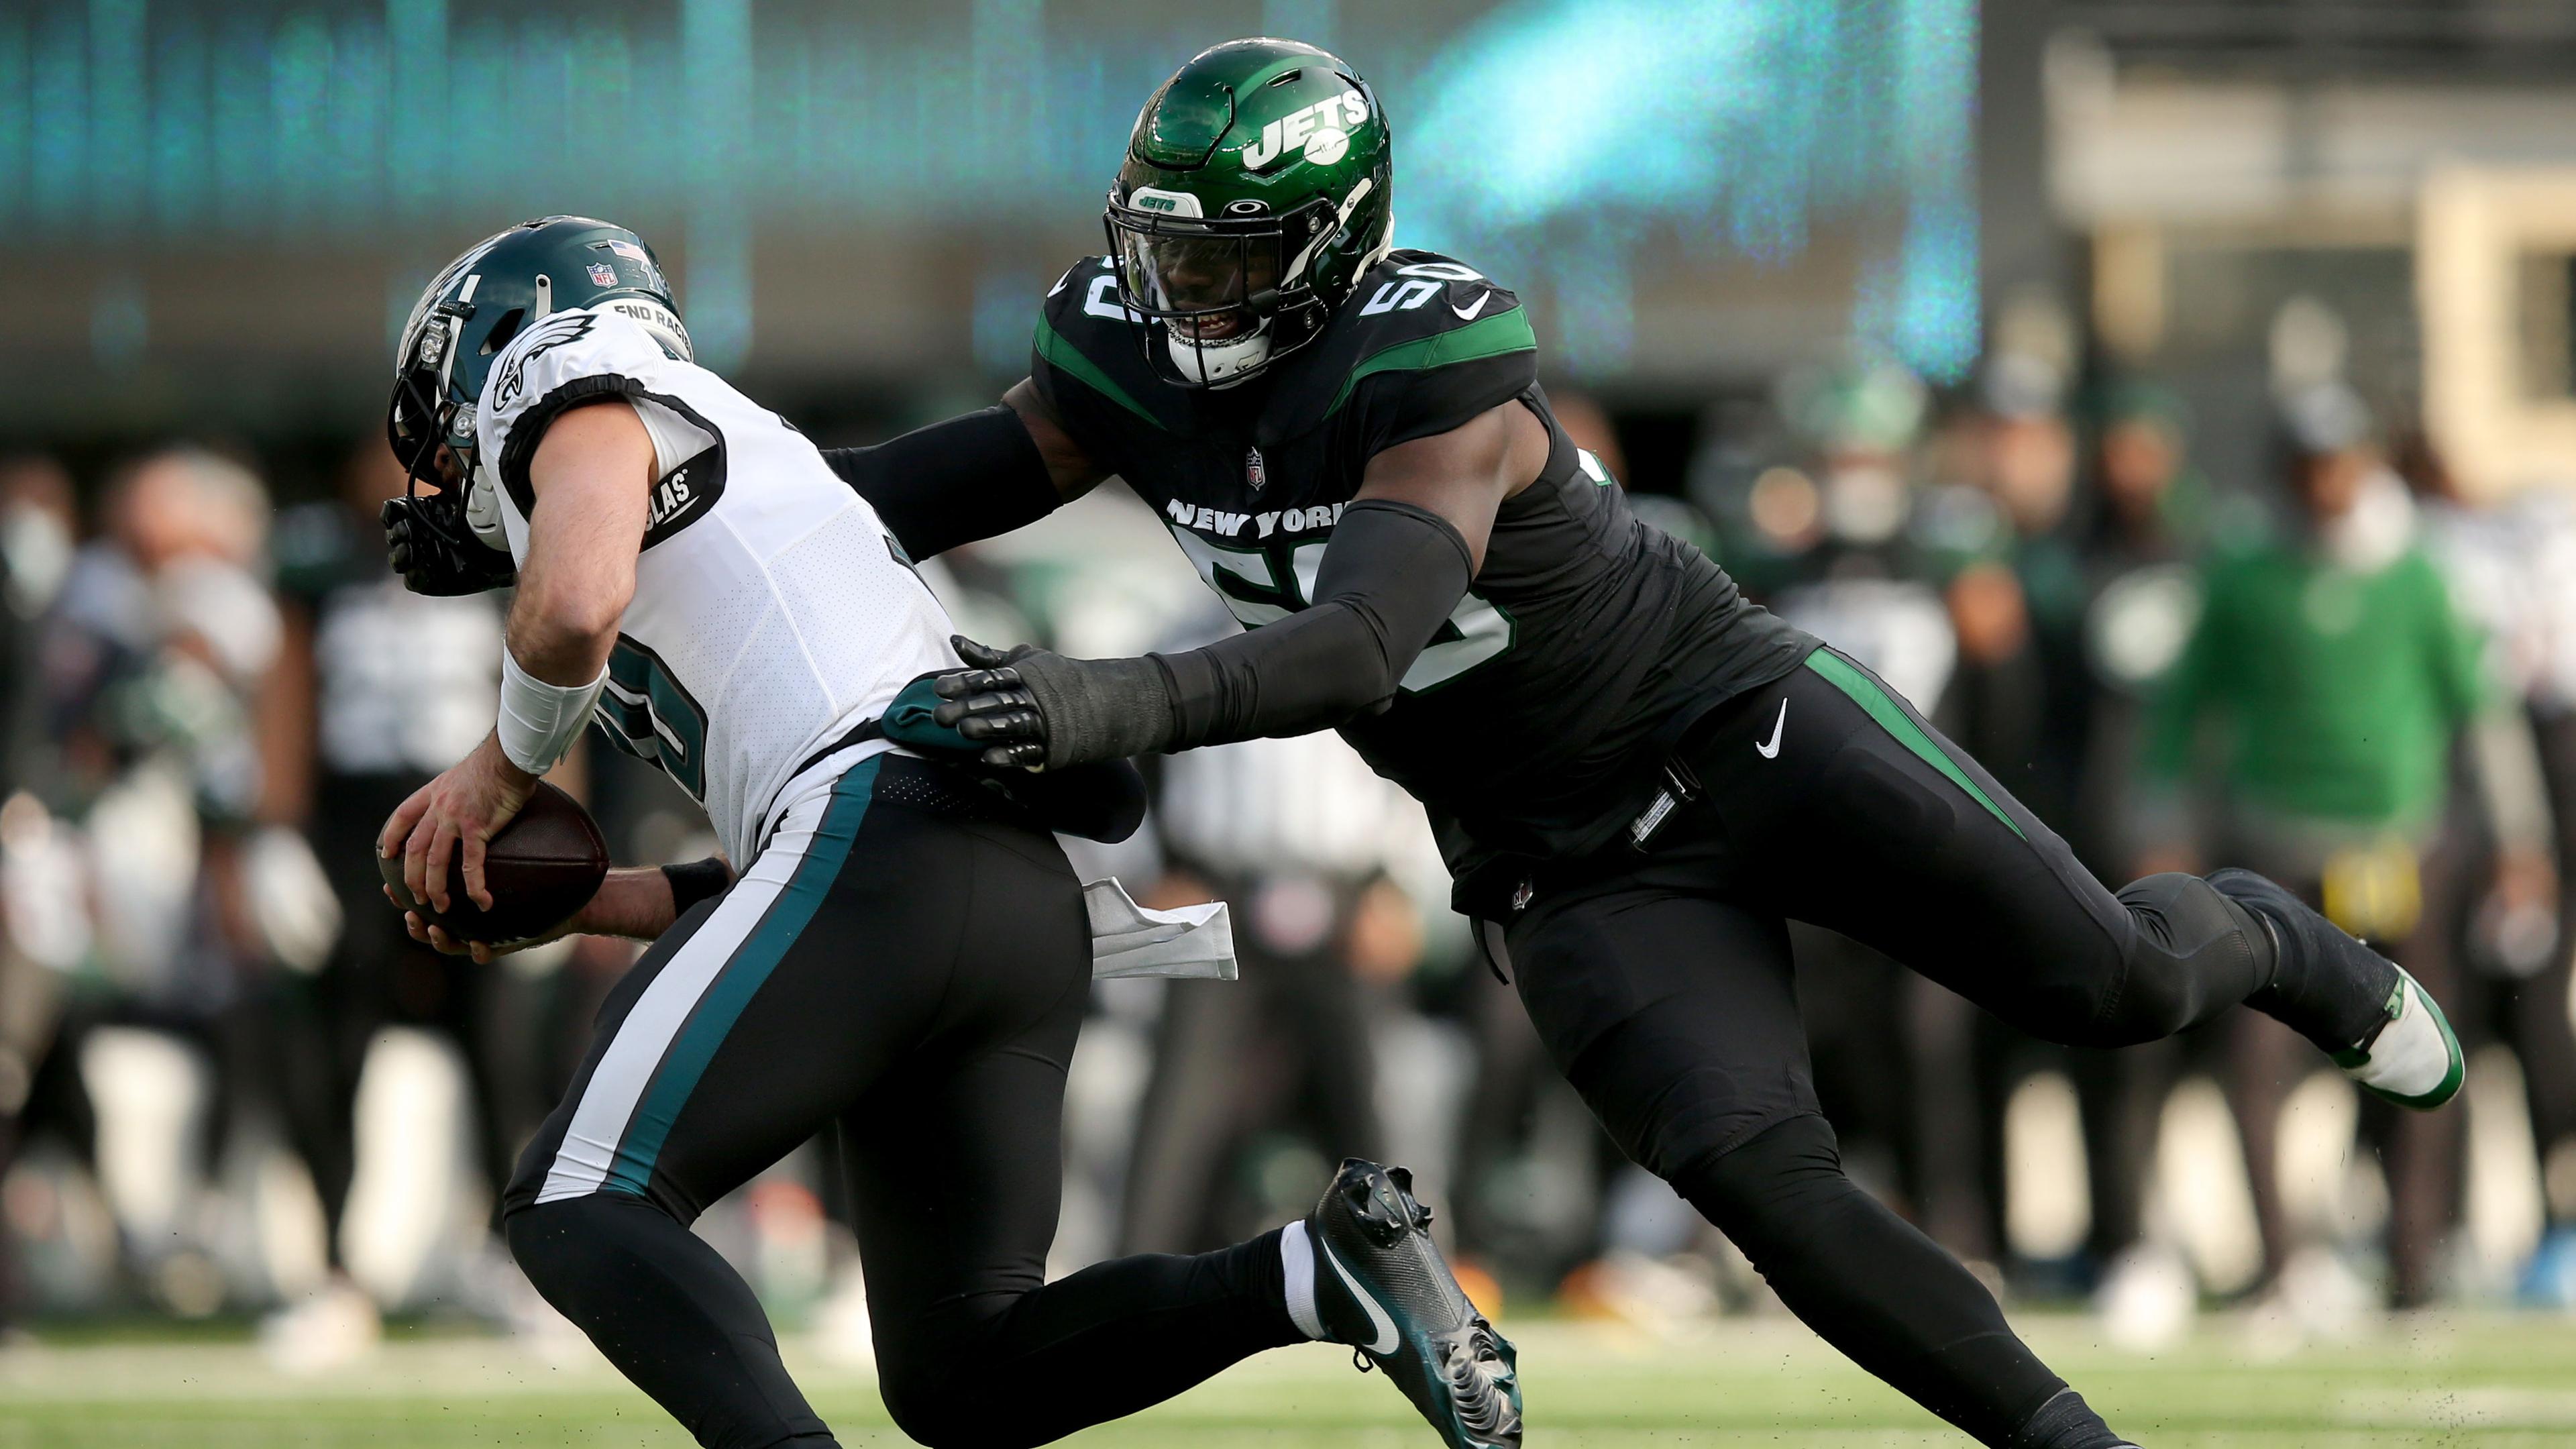 Dec 5, 2021; East Rutherford, New Jersey, USA; Philadelphia Eagles quarterback Gardner Minshew (10) is sacked by New York Jets defensive end Shaq Lawson (50) during the second quarter at MetLife Stadium. Lawson was called for a facemask penalty on the play. / Brad Penner-USA TODAY Sports